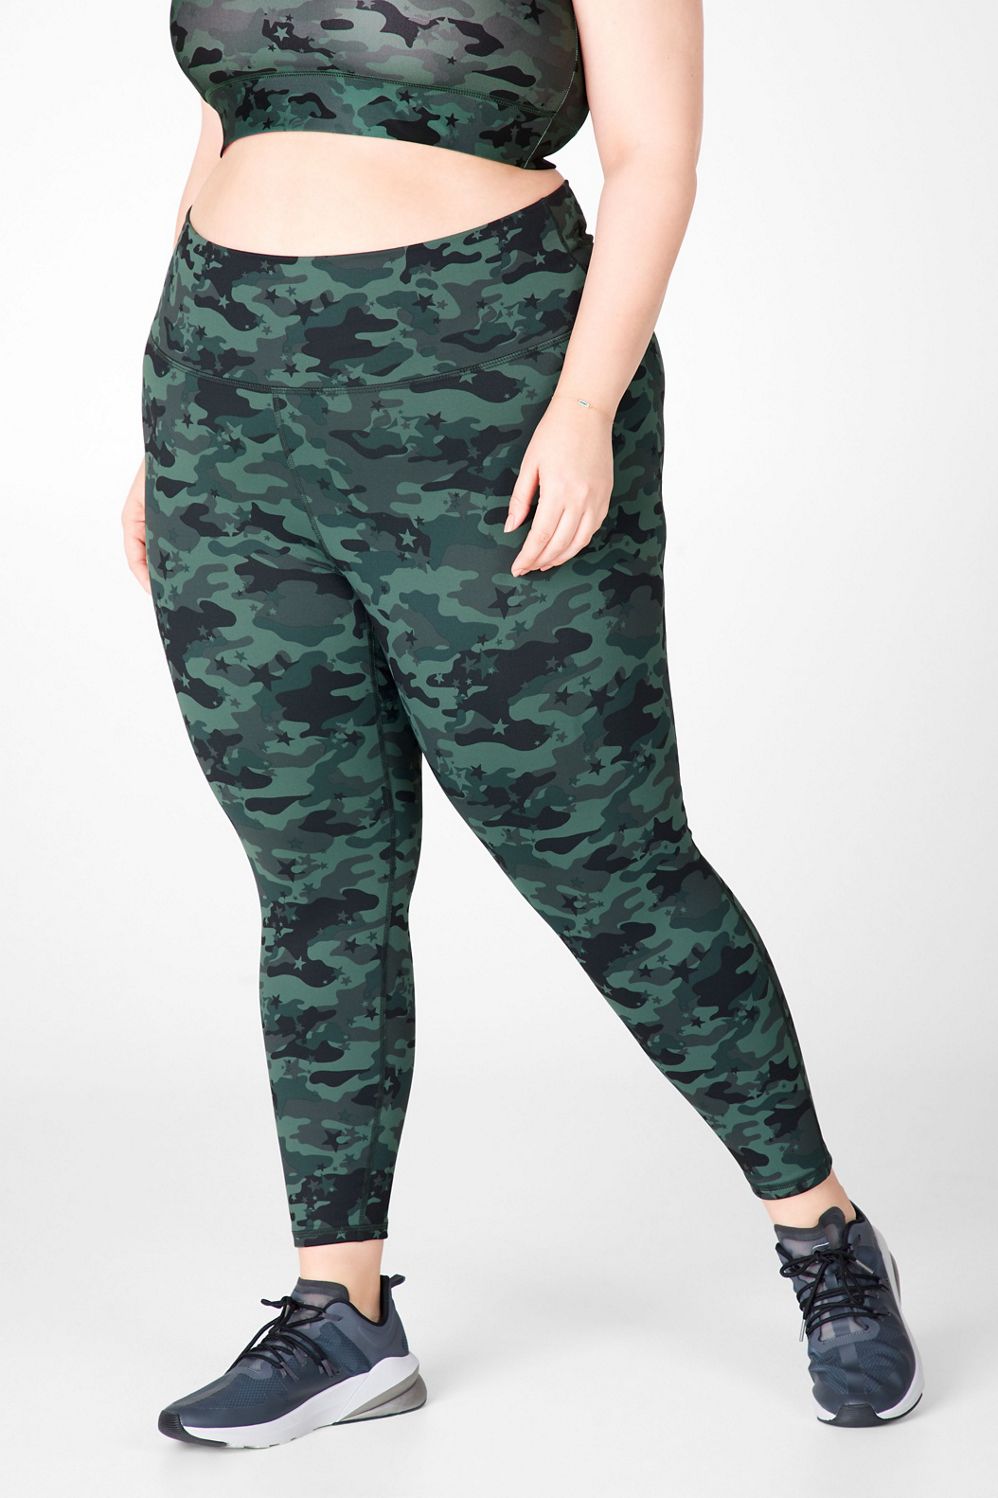 Fabletics Define PowerHold® Mid-Rise Legging Camo Print Full Length Yoga  Pant XS Multiple - $30 (60% Off Retail) - From Hoarders